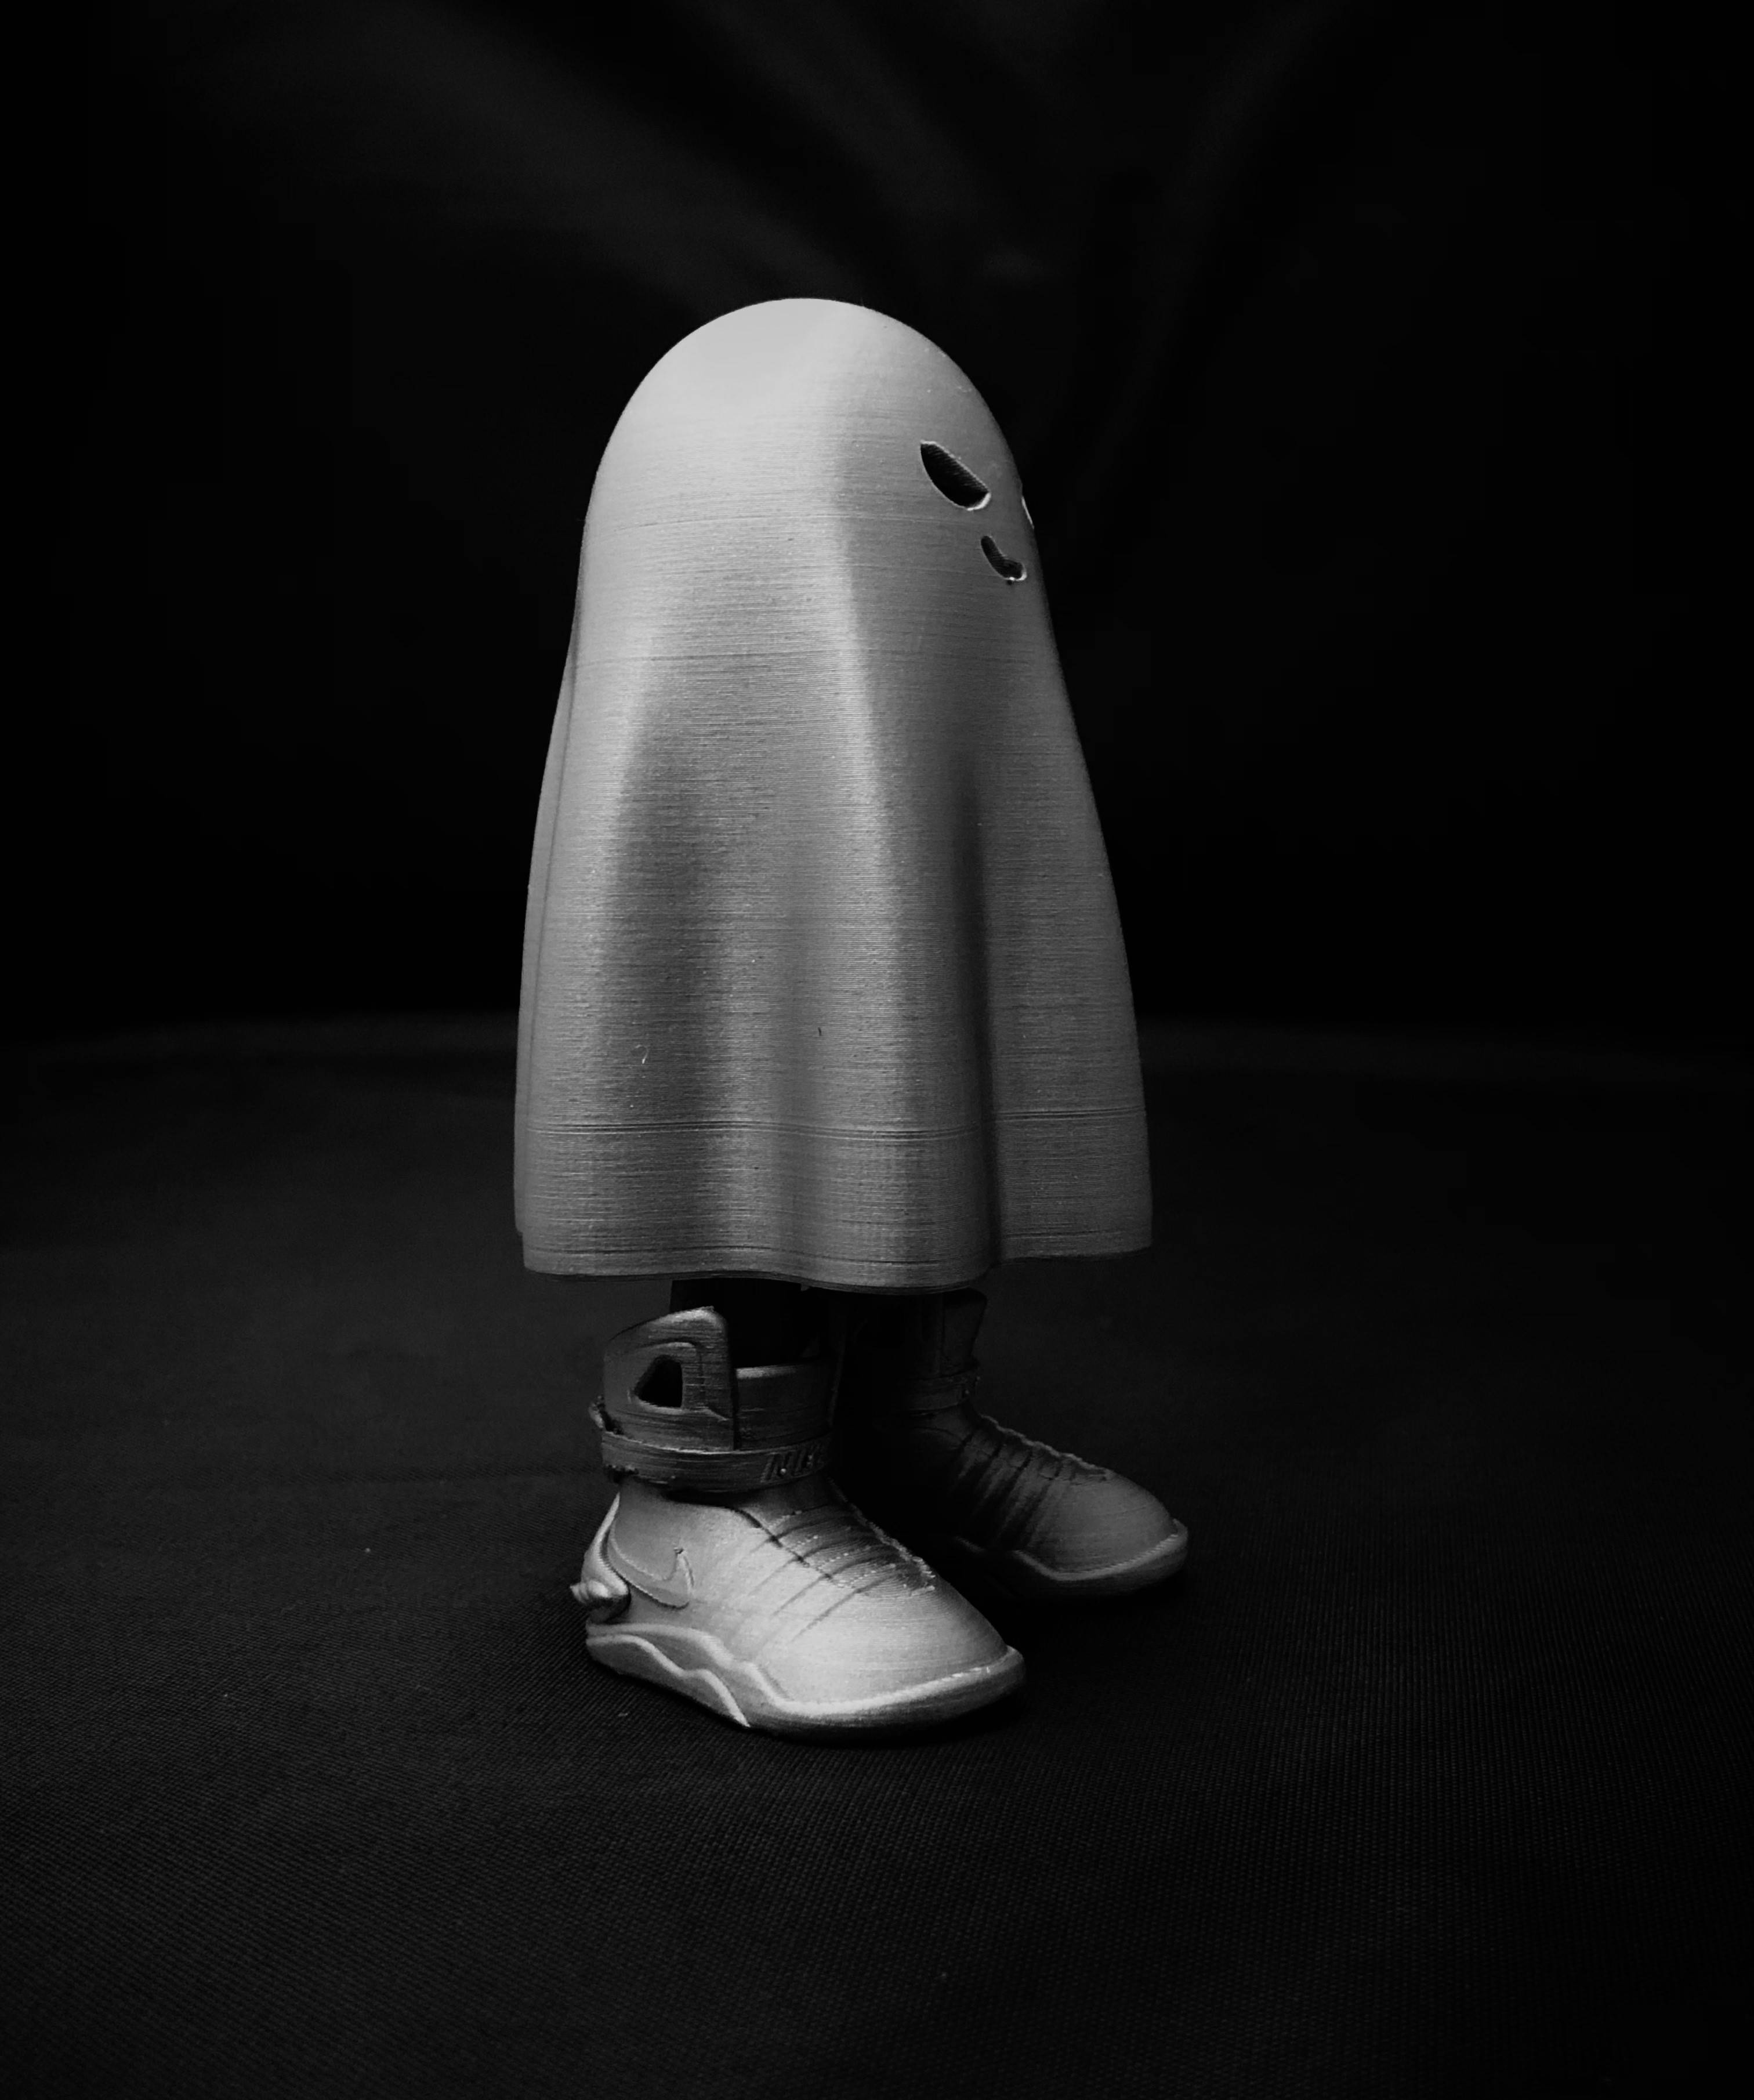 NEW sneaker for Ghosties Back to the Future